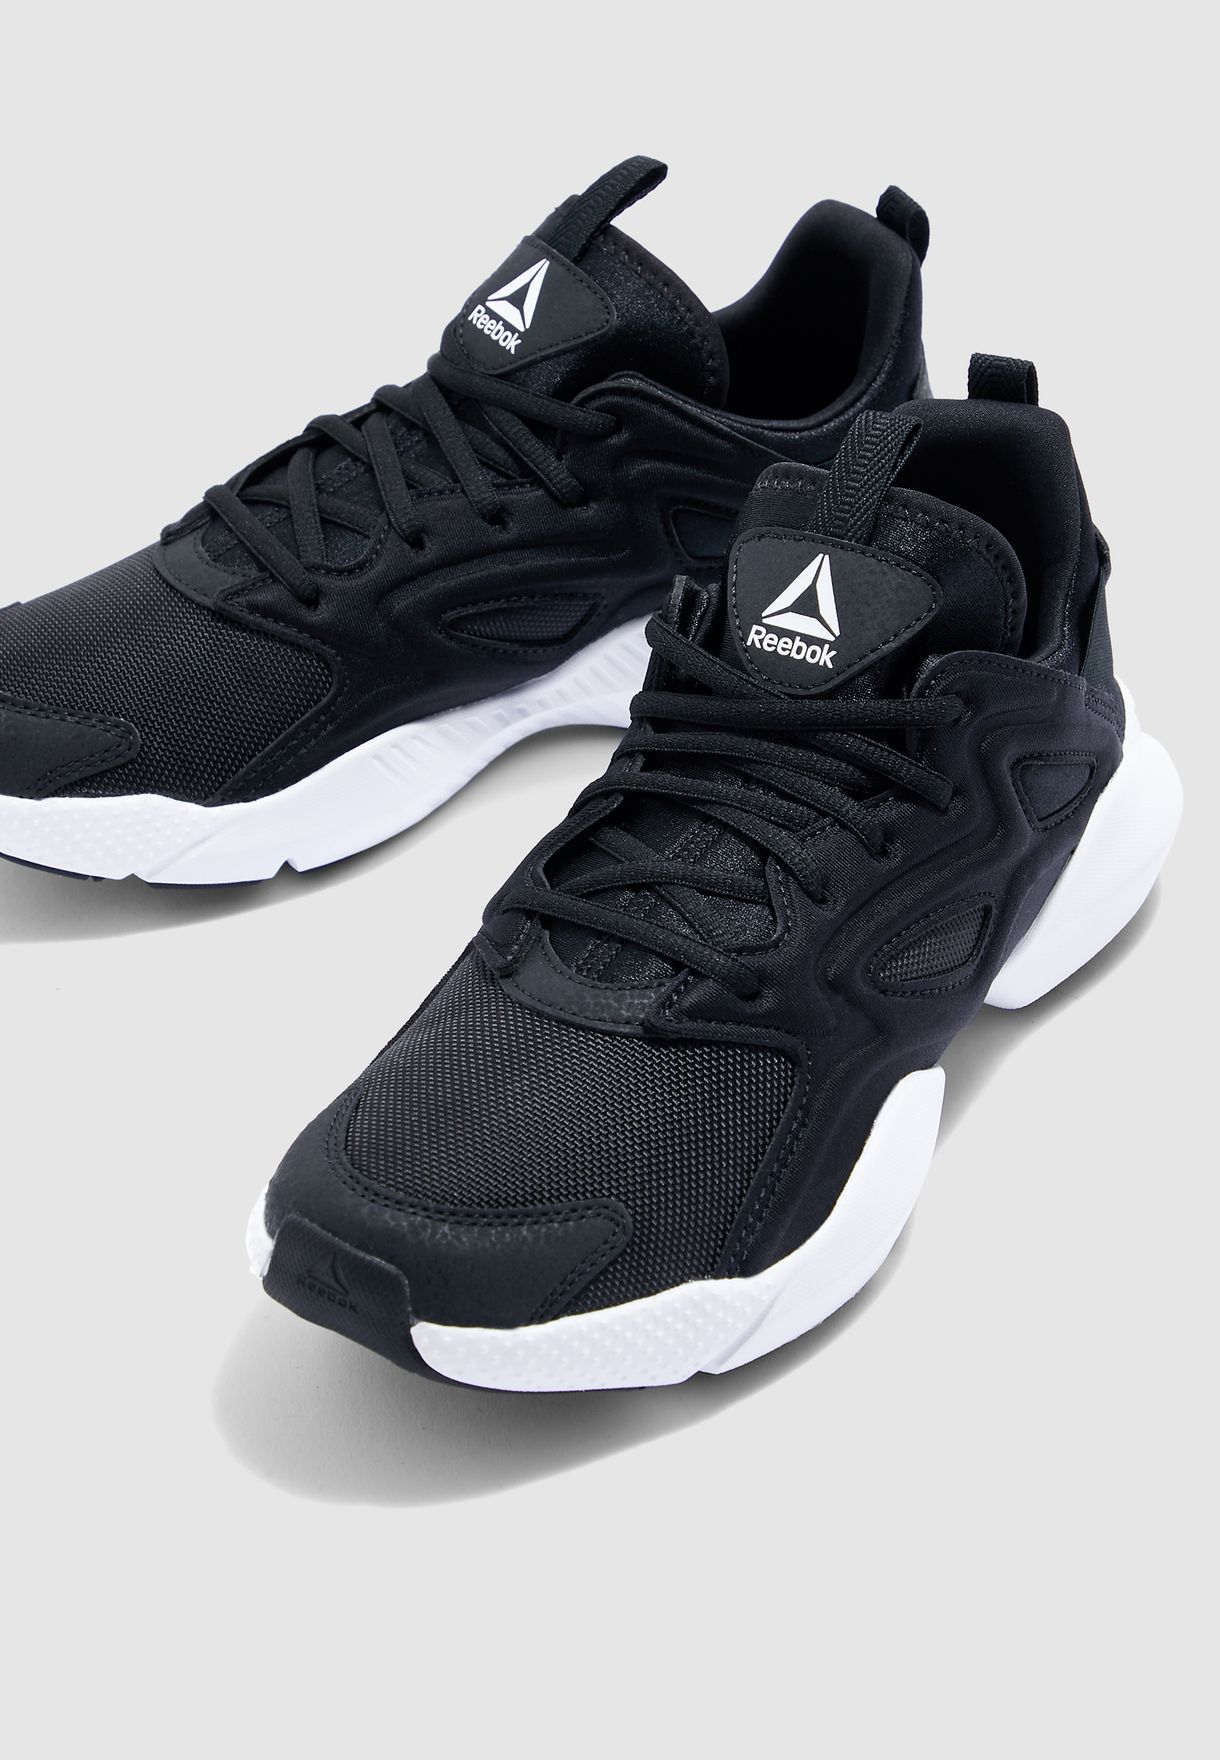 sports shoes with black sole